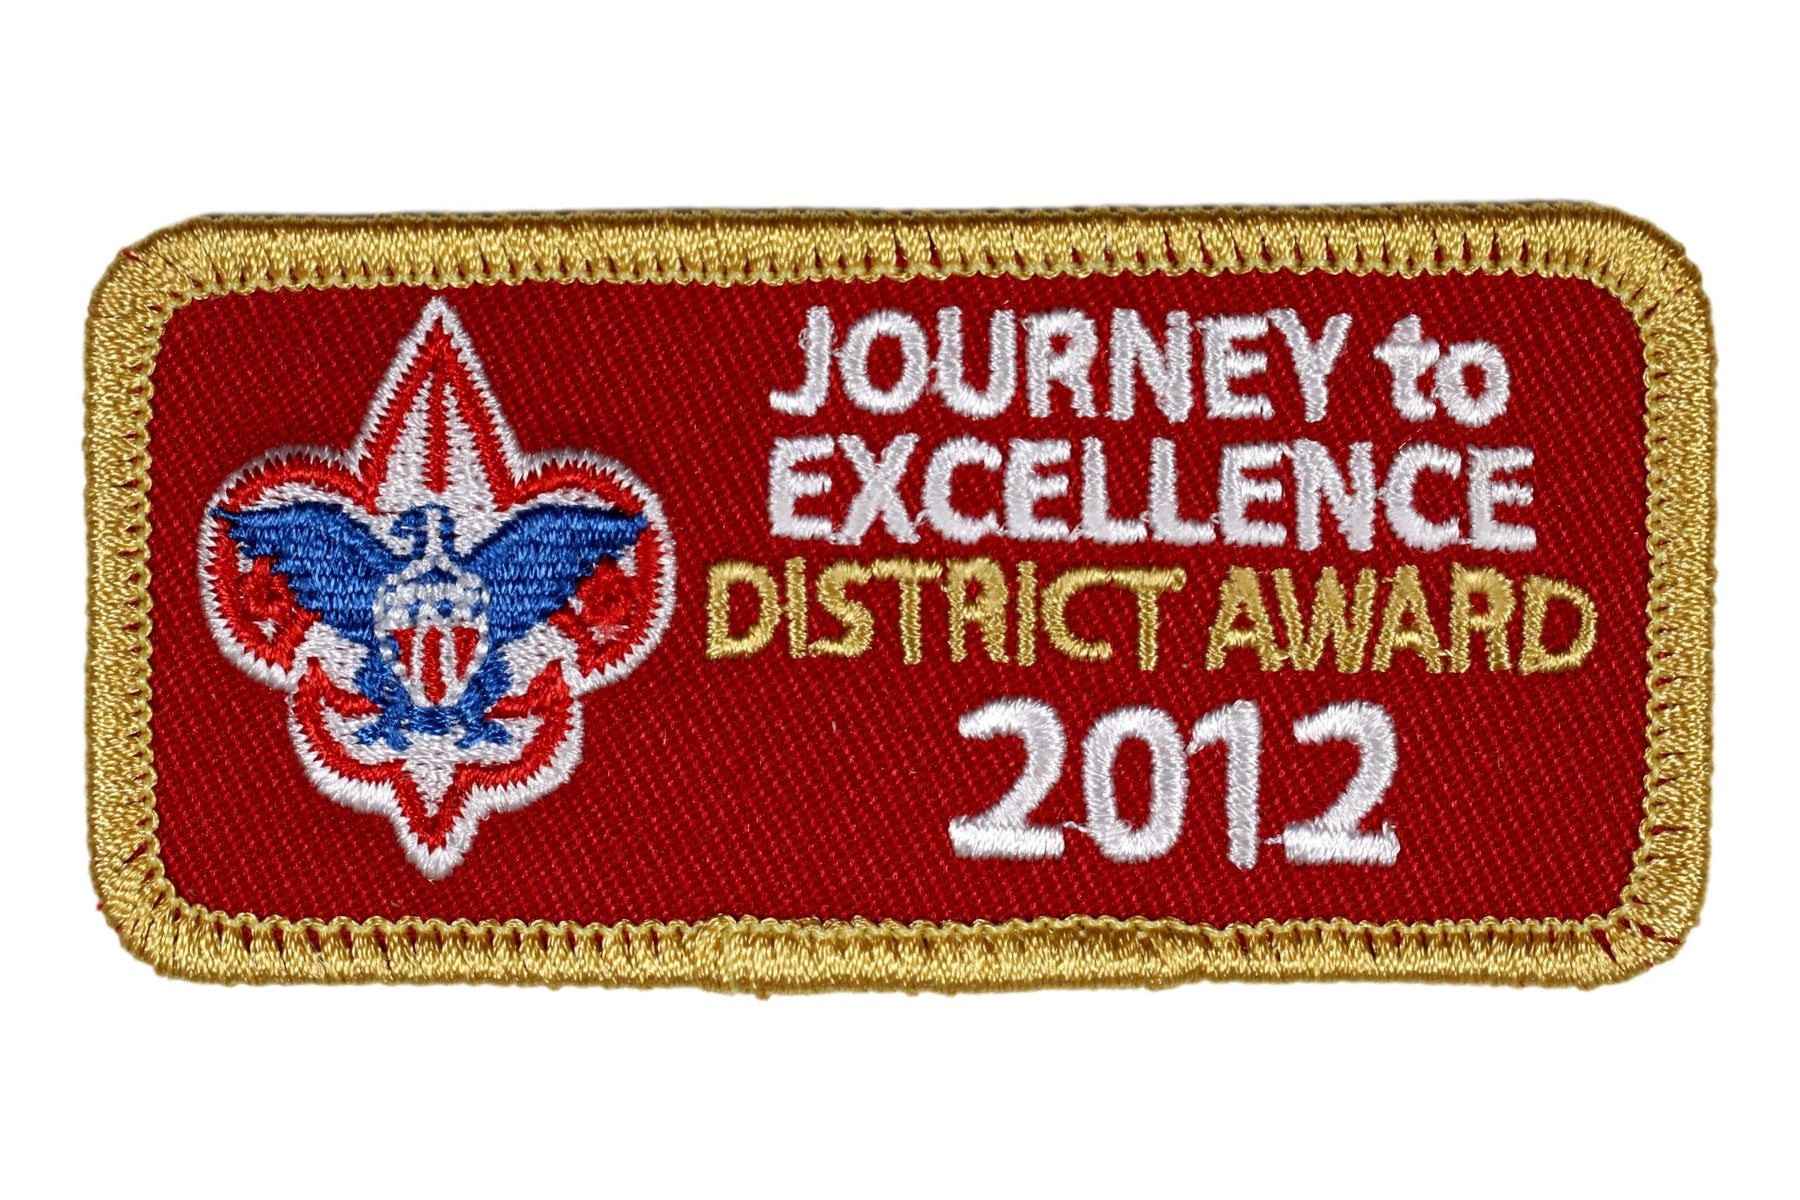 2012 District Journey to Excellence Award Gold Patch